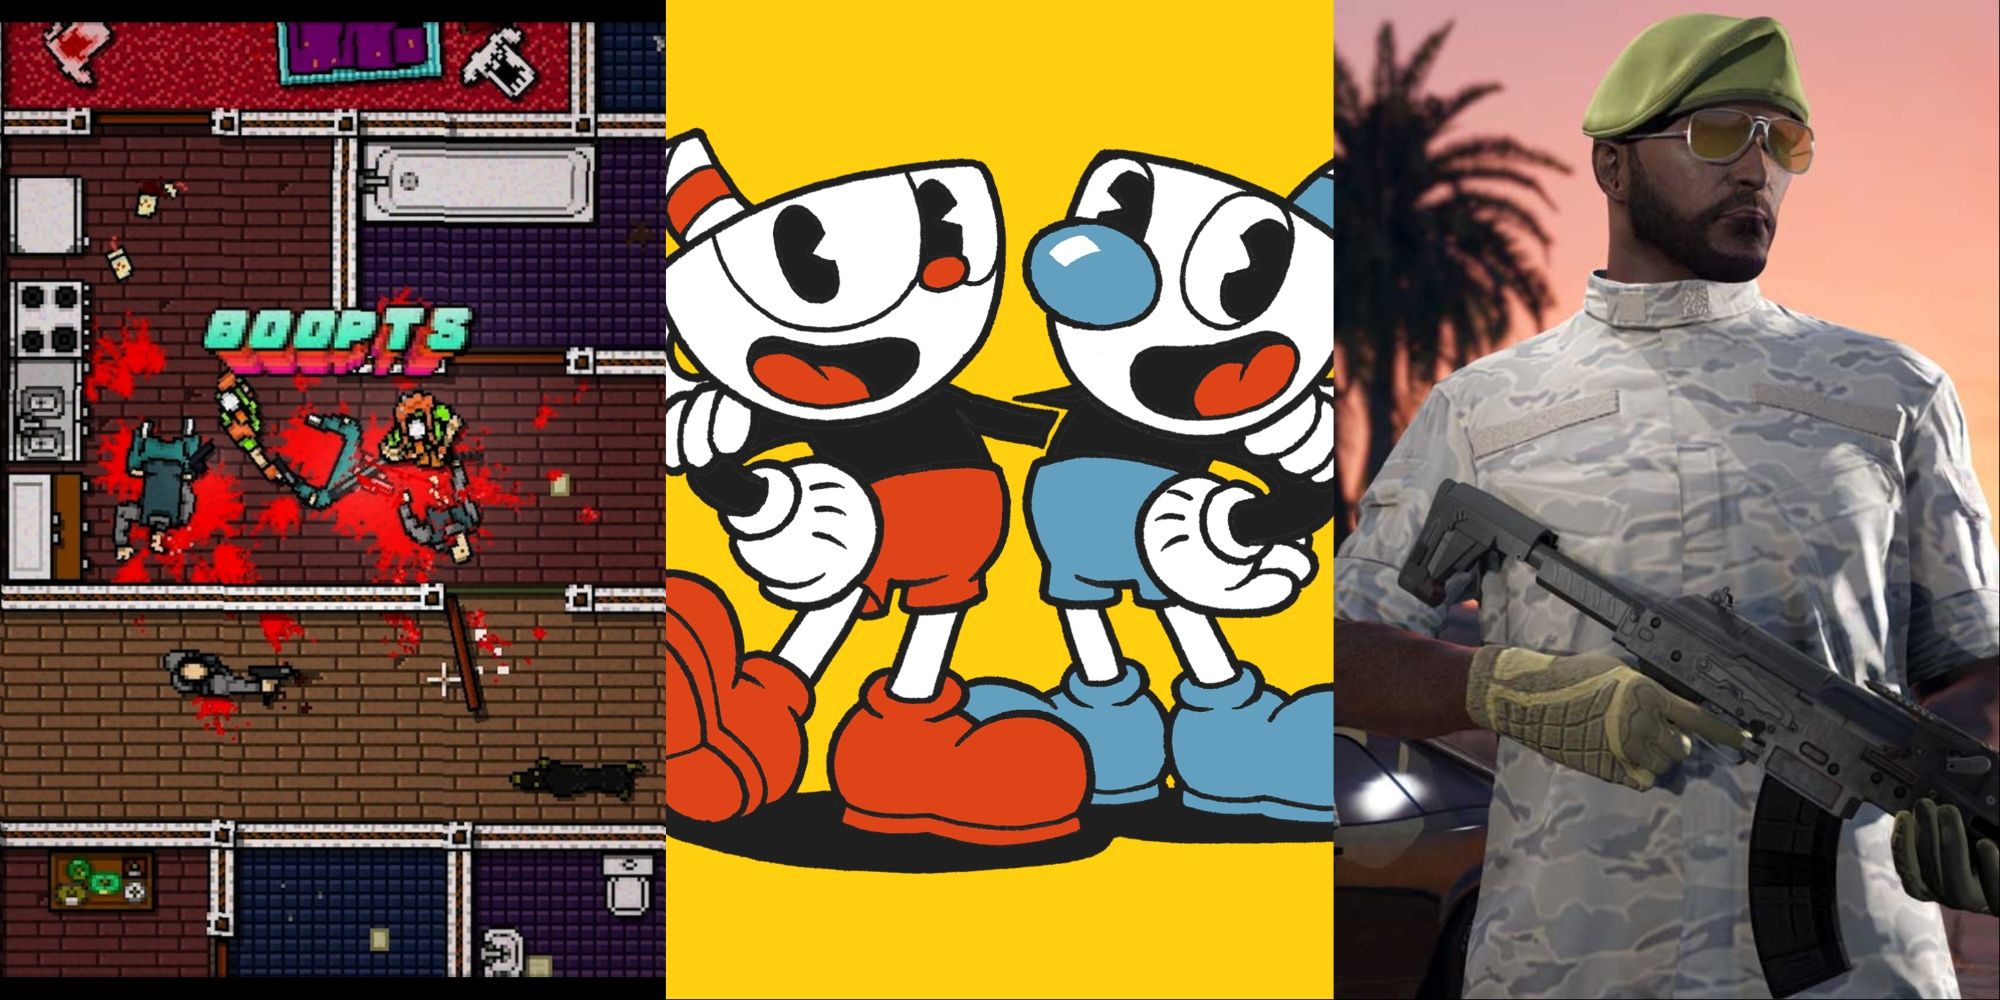 Gameplay from Hotline miami, Cuphead and Grand theft auto online